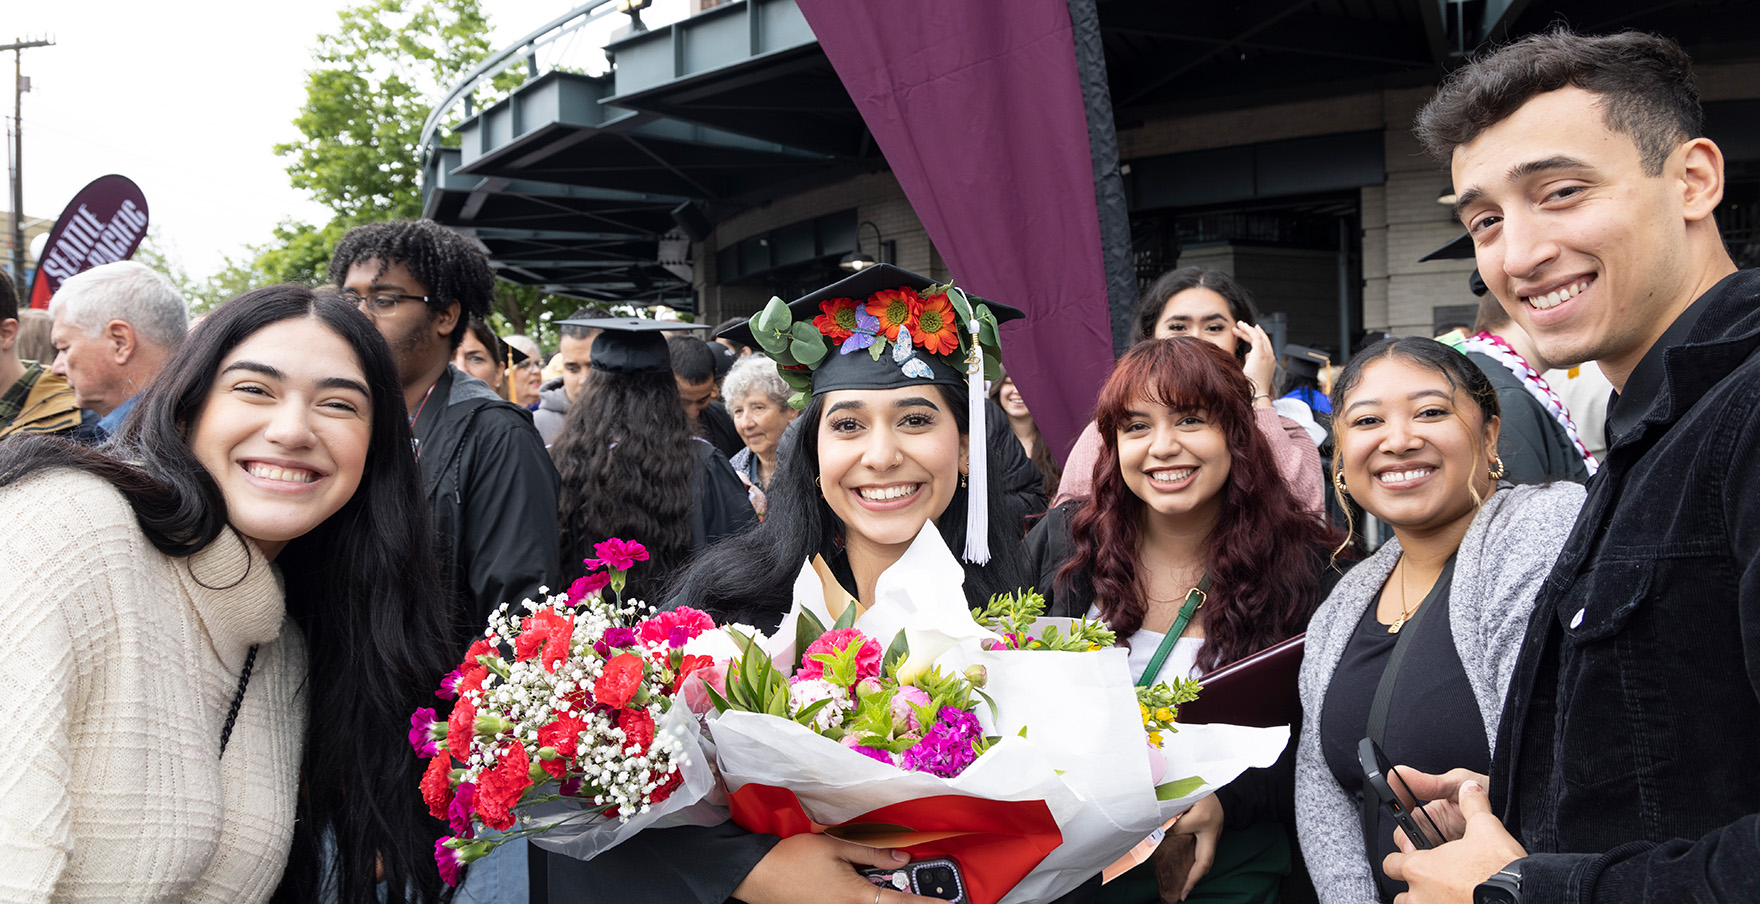 SPU graduates celebrate outside of T-Mobile Park | photo by Mike Siegel